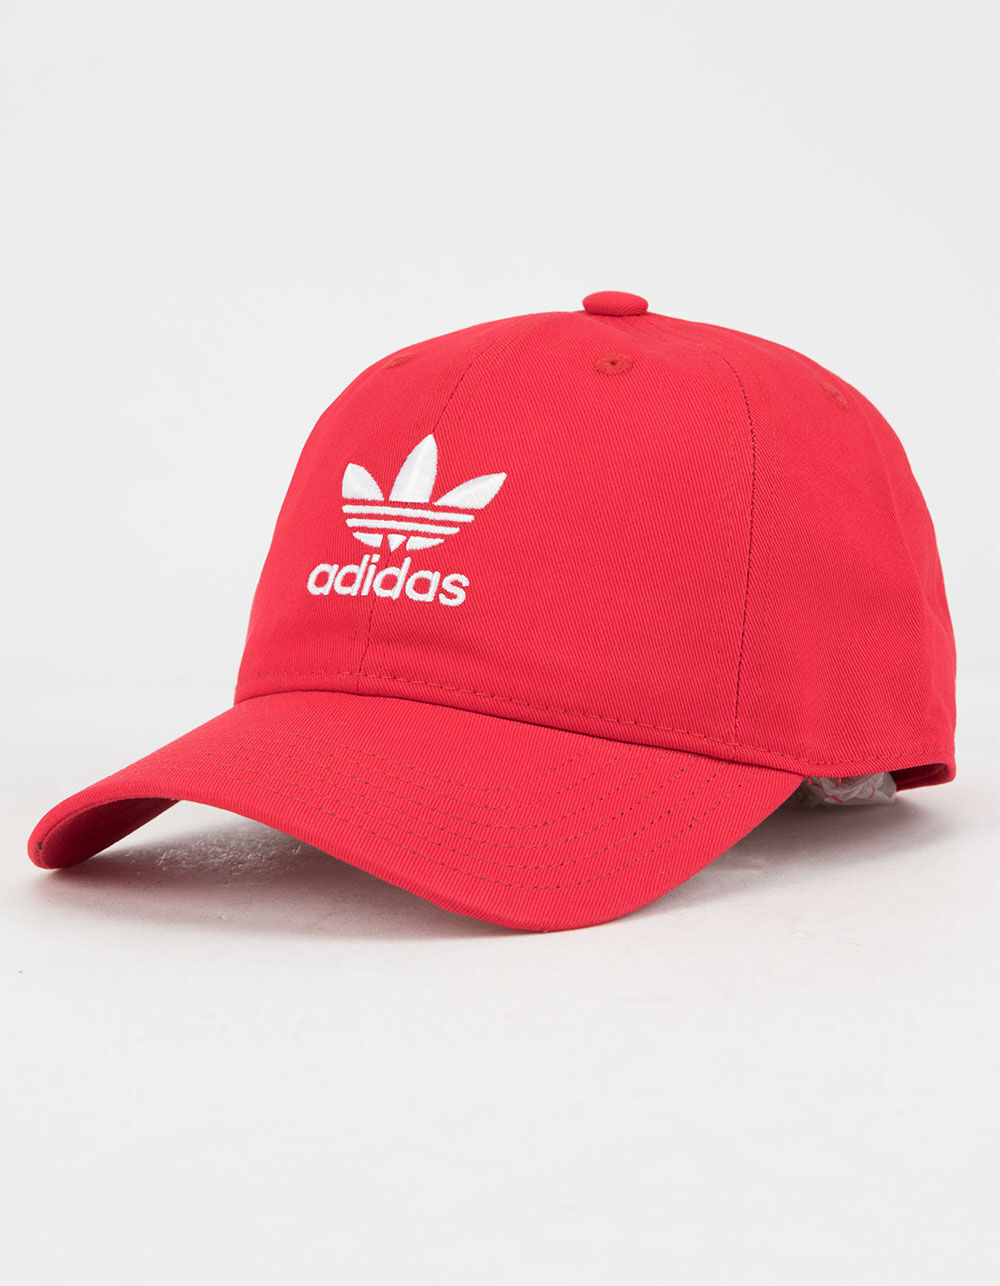 ADIDAS Originals Relaxed Red & White Womens Strapback Hat image number 0